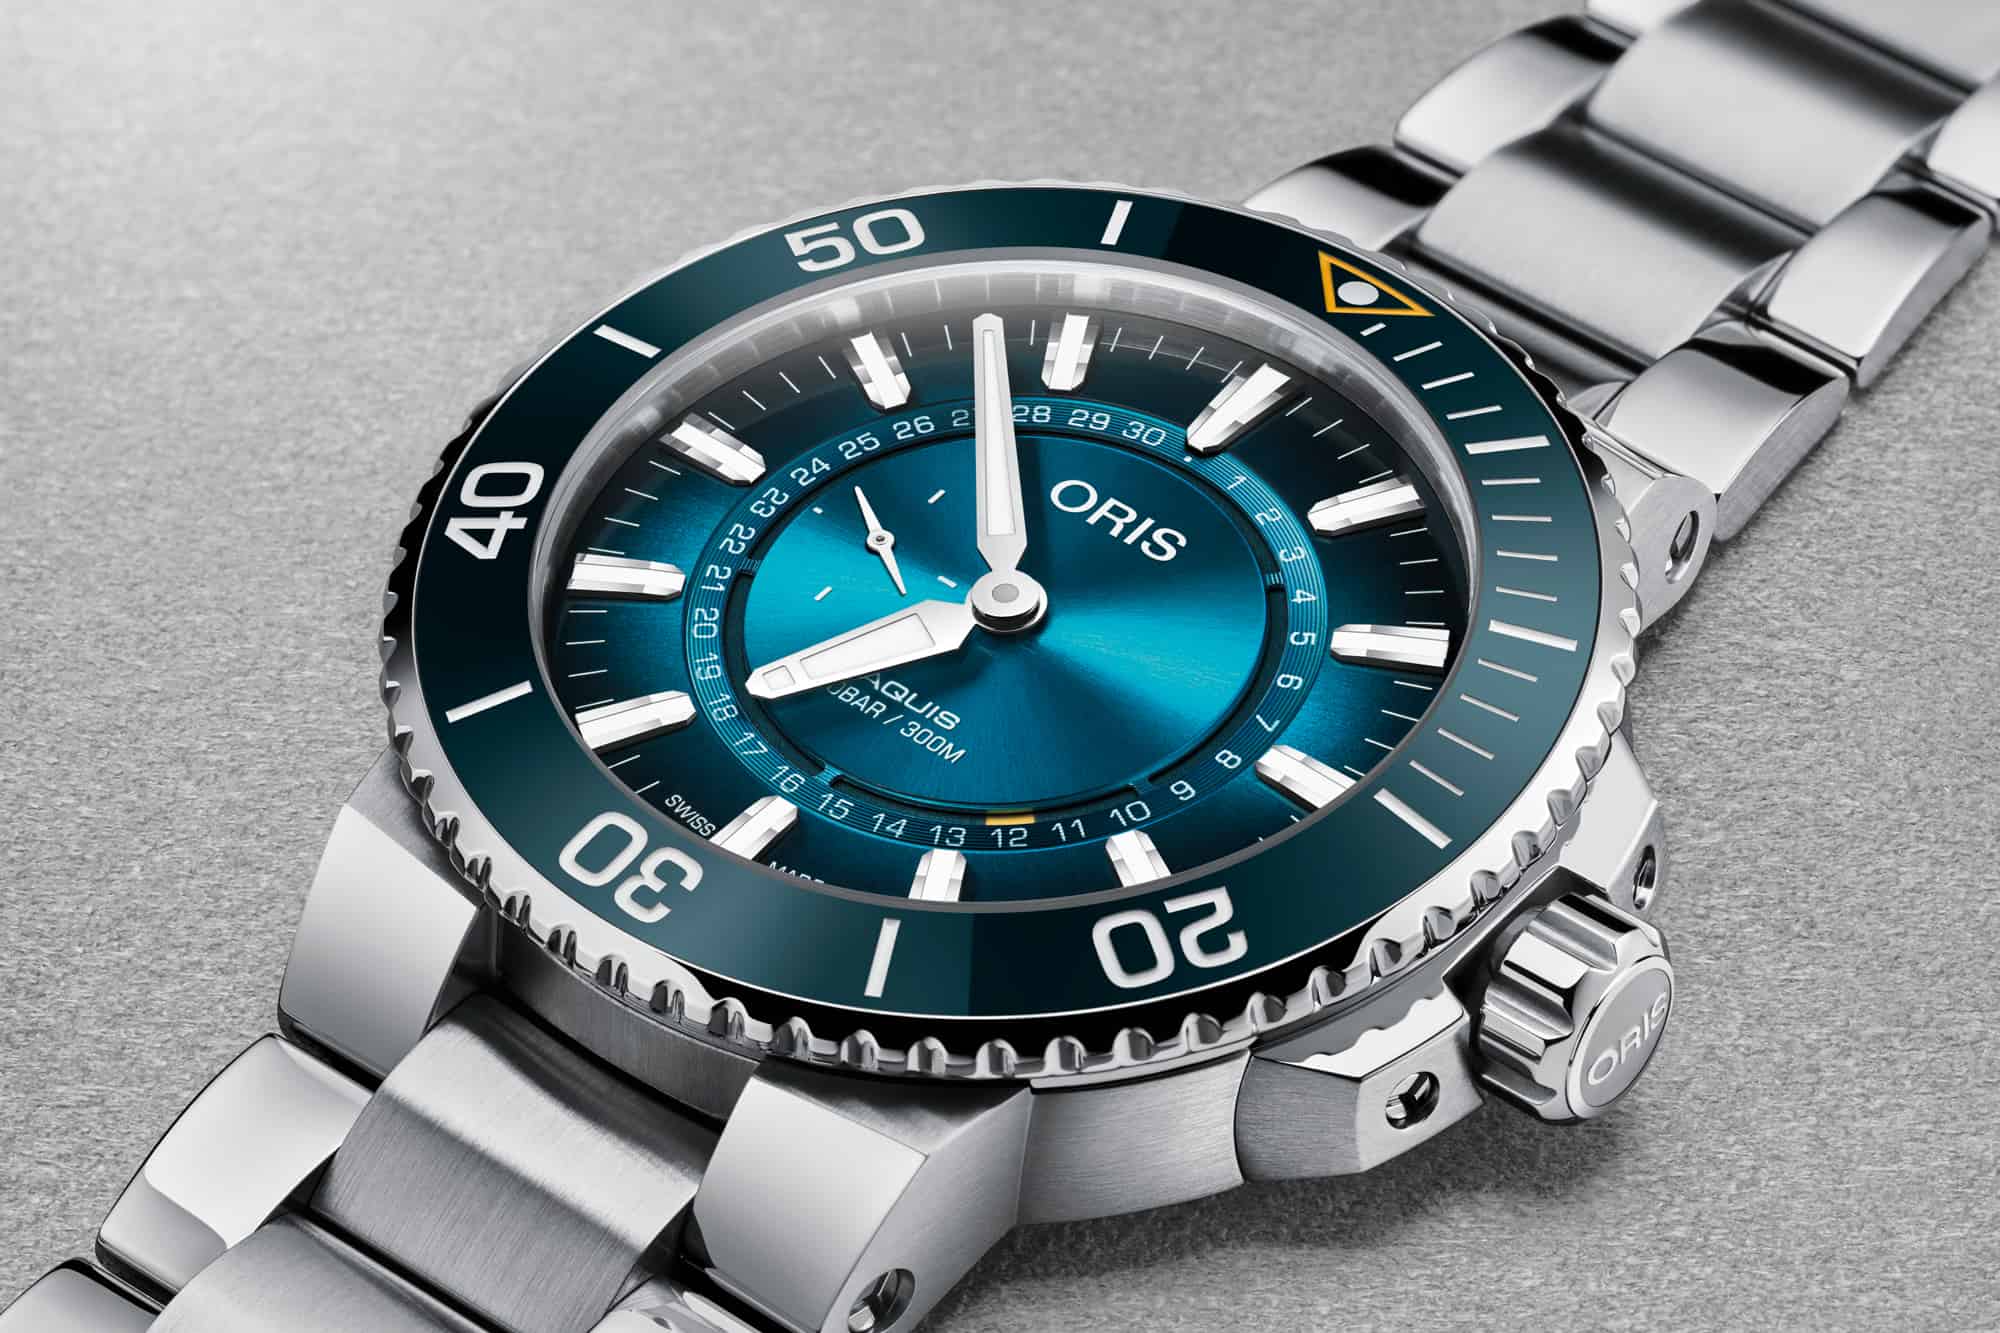 Baselworld 2019: Introducing the Oris Great Barrier Reef Limited Edition III